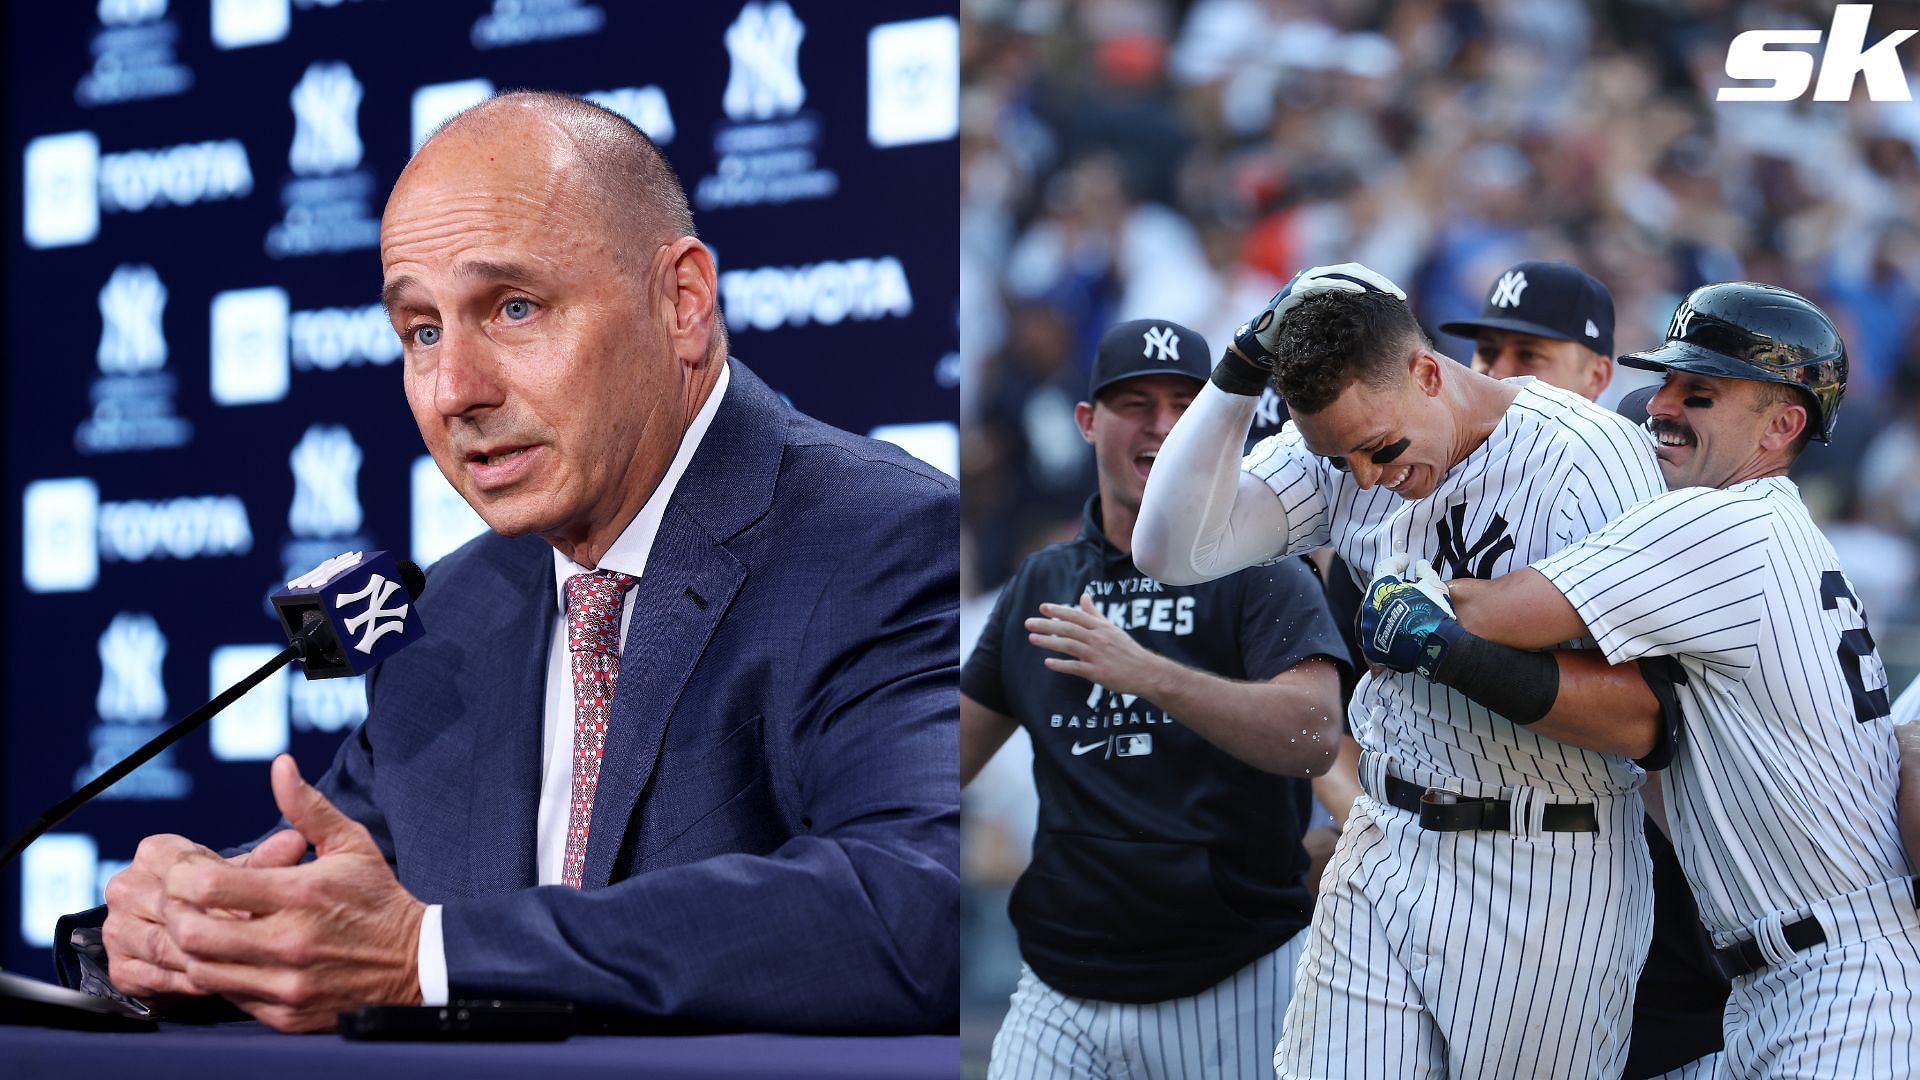 We asked AI if Brian Cashman is the main culprit behind the Yankees